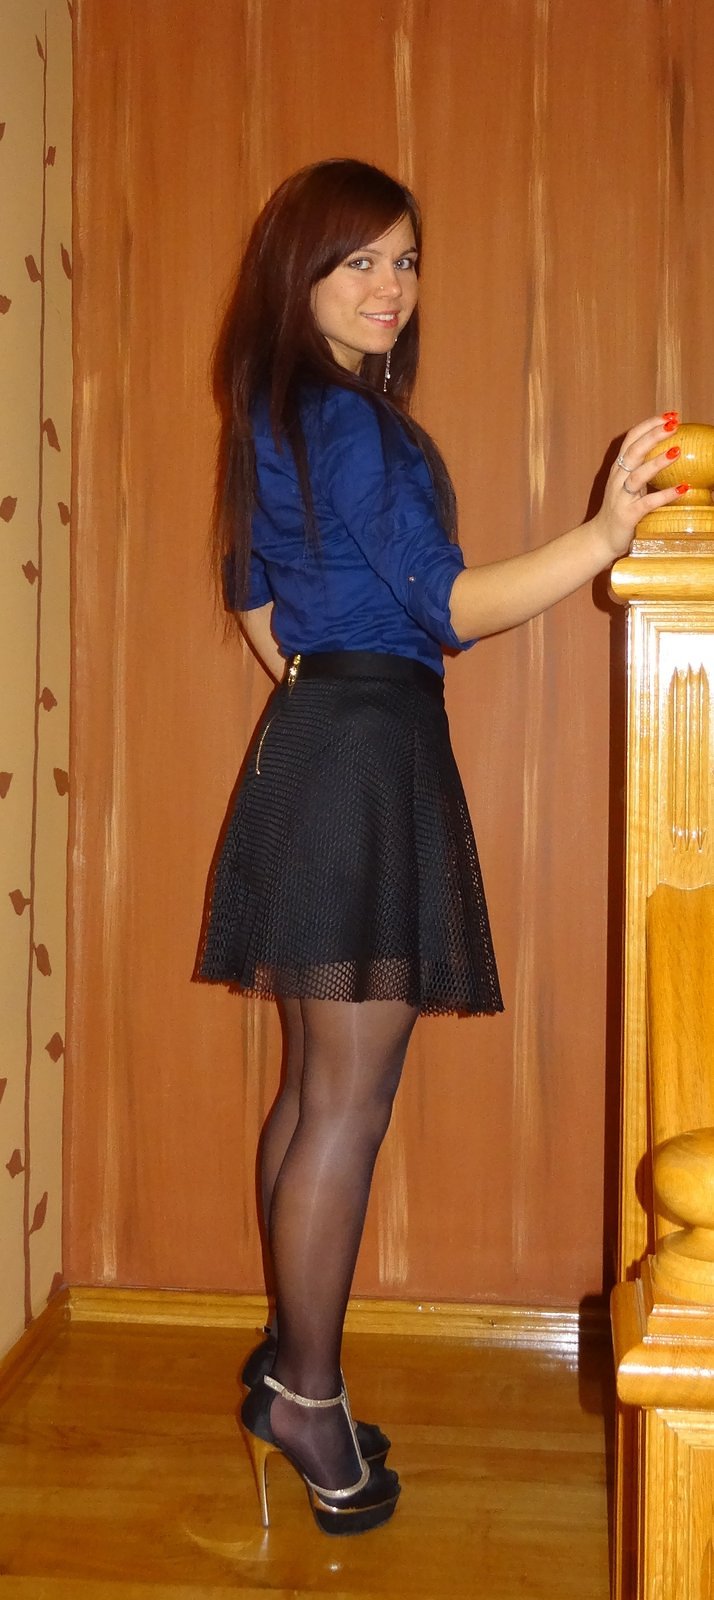 Very pretty young girl in shiny nylon stockings, black mini skirt, silk blue blouse and black'n golden high heeled sandals picture